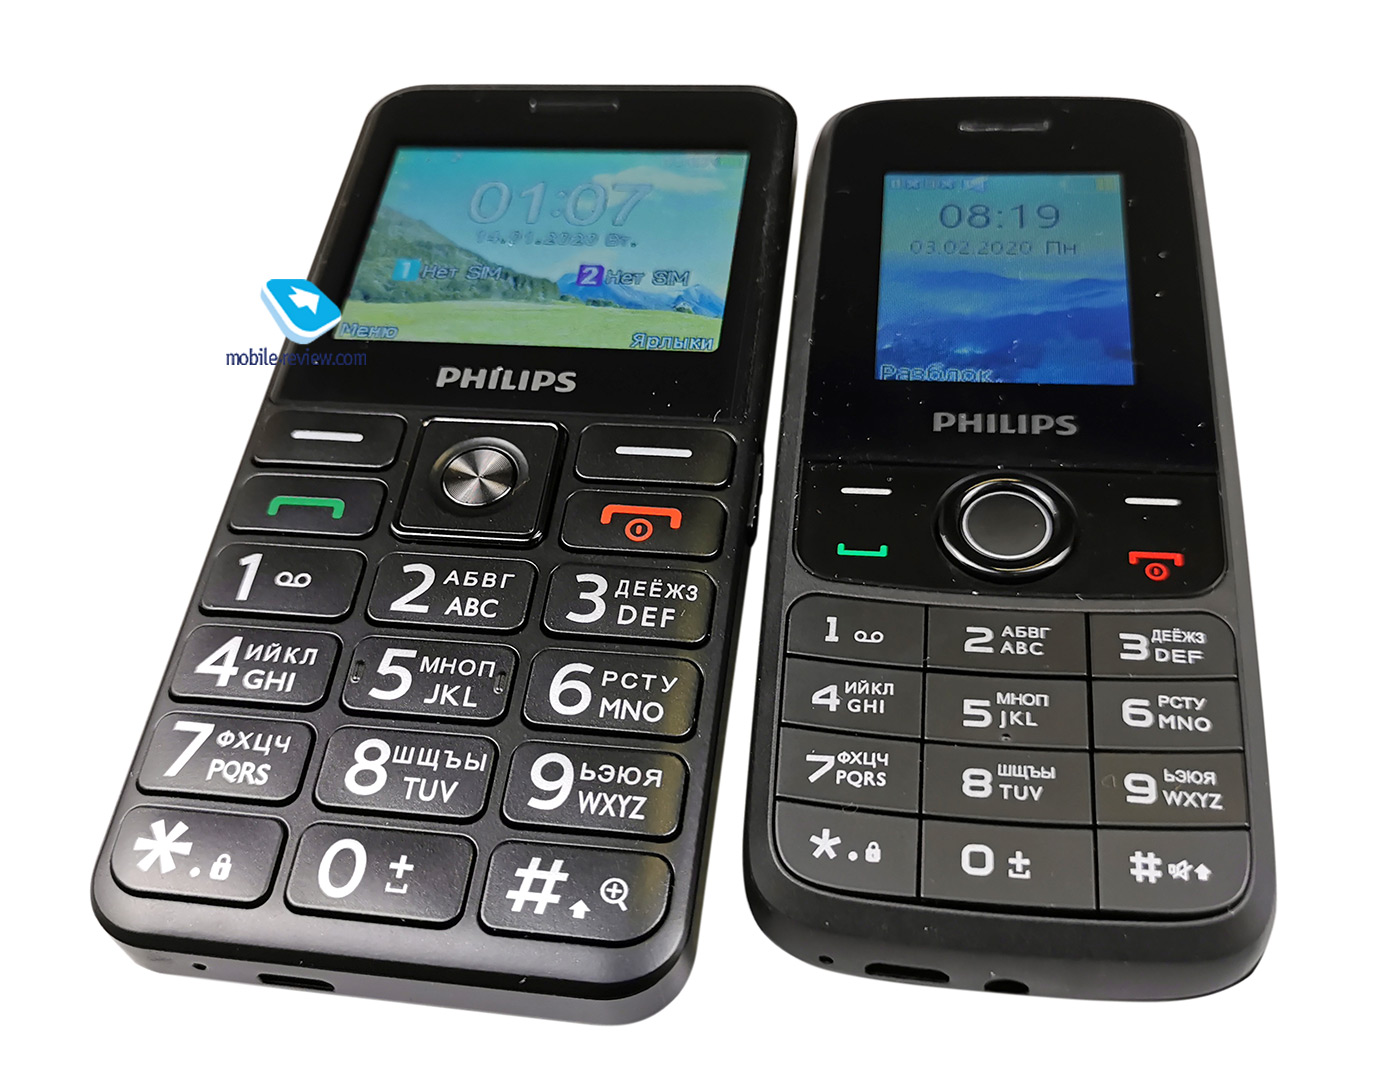 Review of Philips Xenium feature phones E117 and Xenium E207